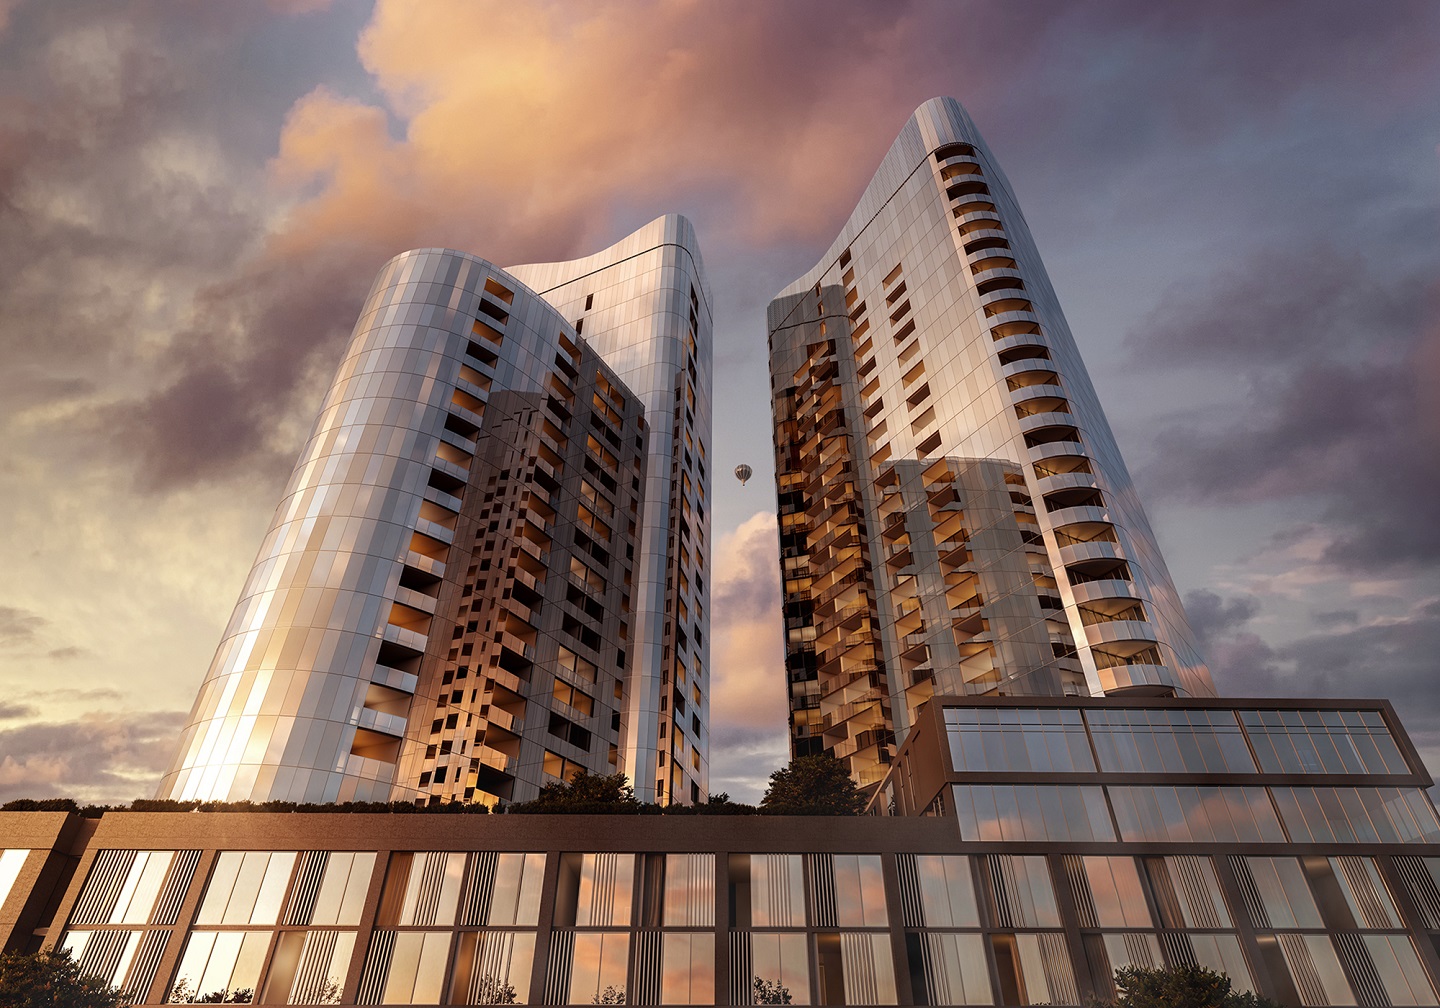 Hera to design the two highest towers in Canberra in keeping with